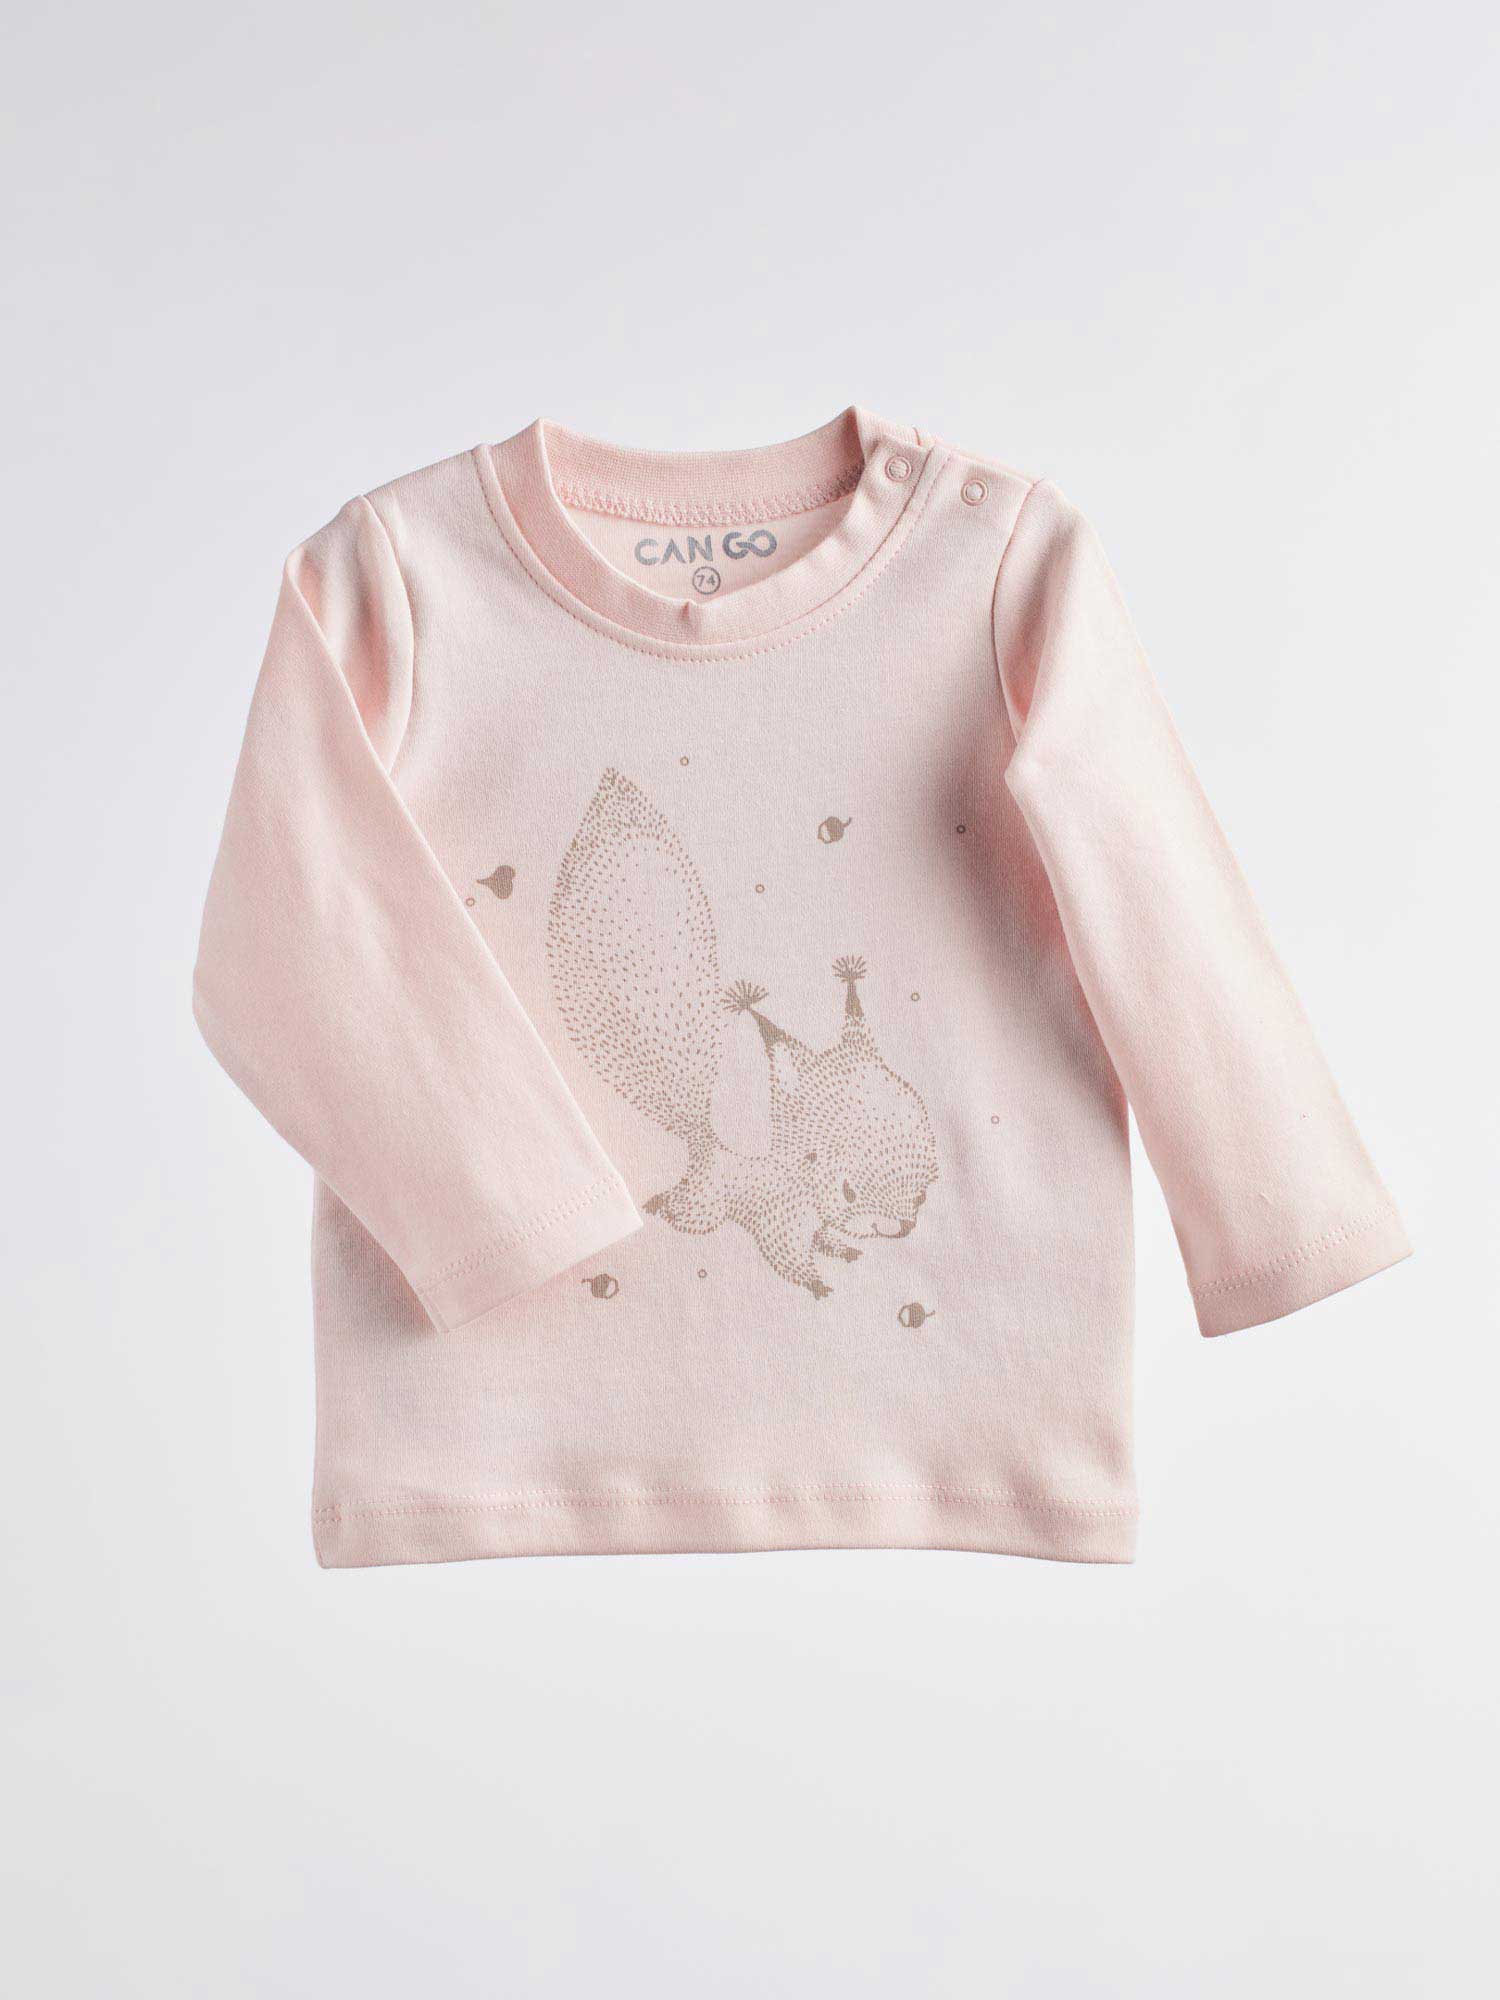 The pajama blouse from newborn pajamas set Squirrel 362 features clippable buttons at the neck and a cute squirrel prin in front